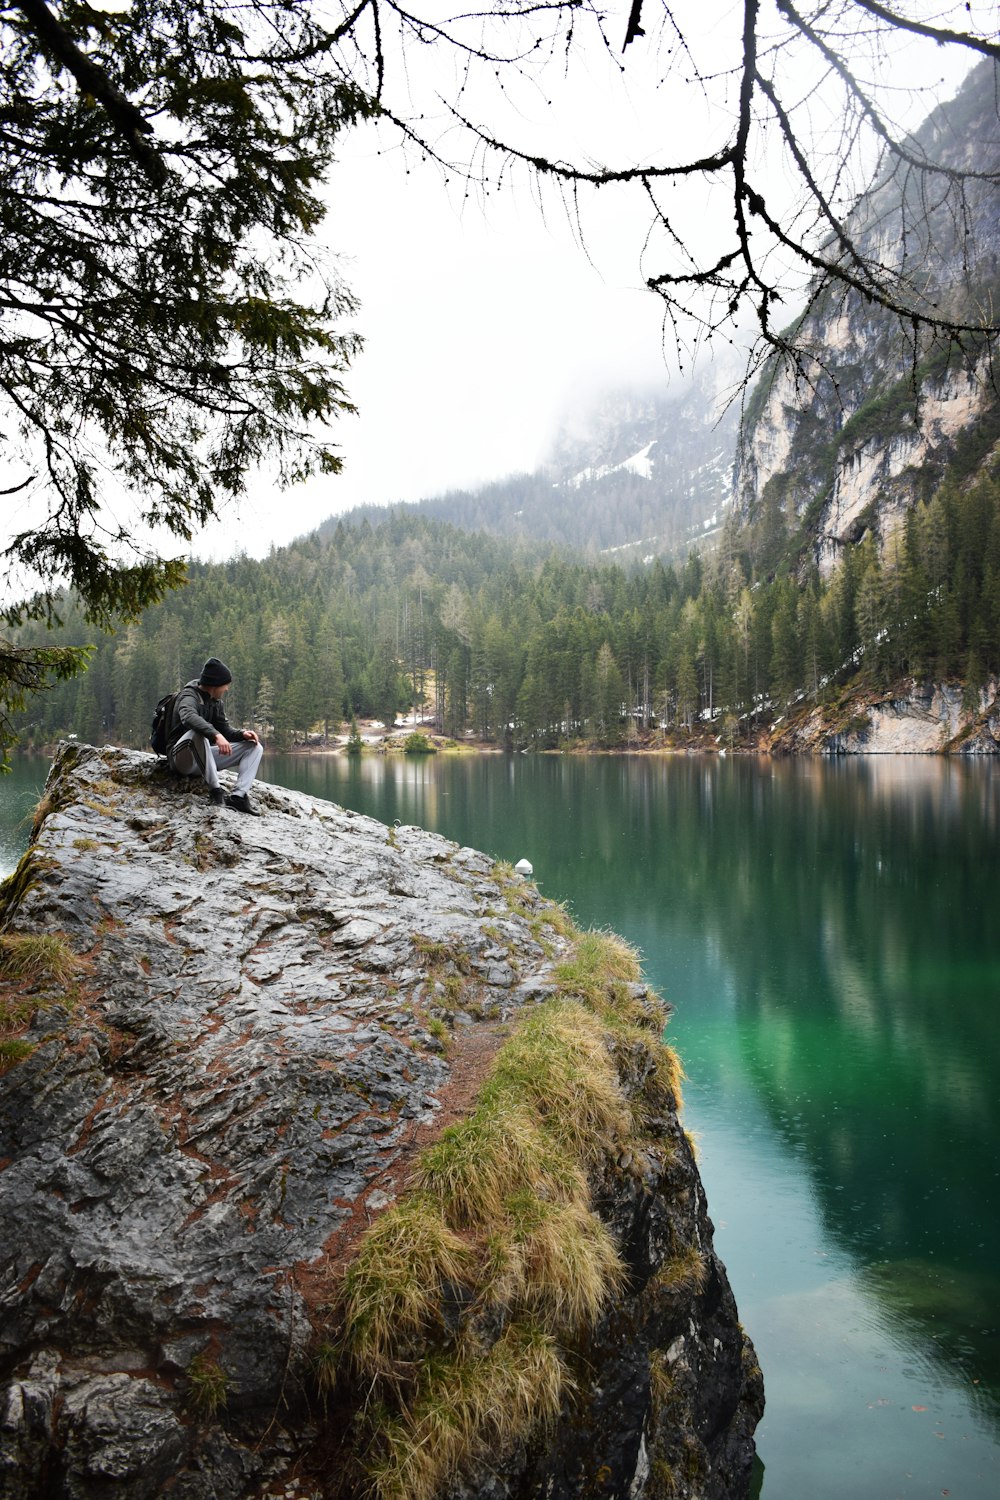 a person sitting on a rock by a lake with trees and mountains in the background